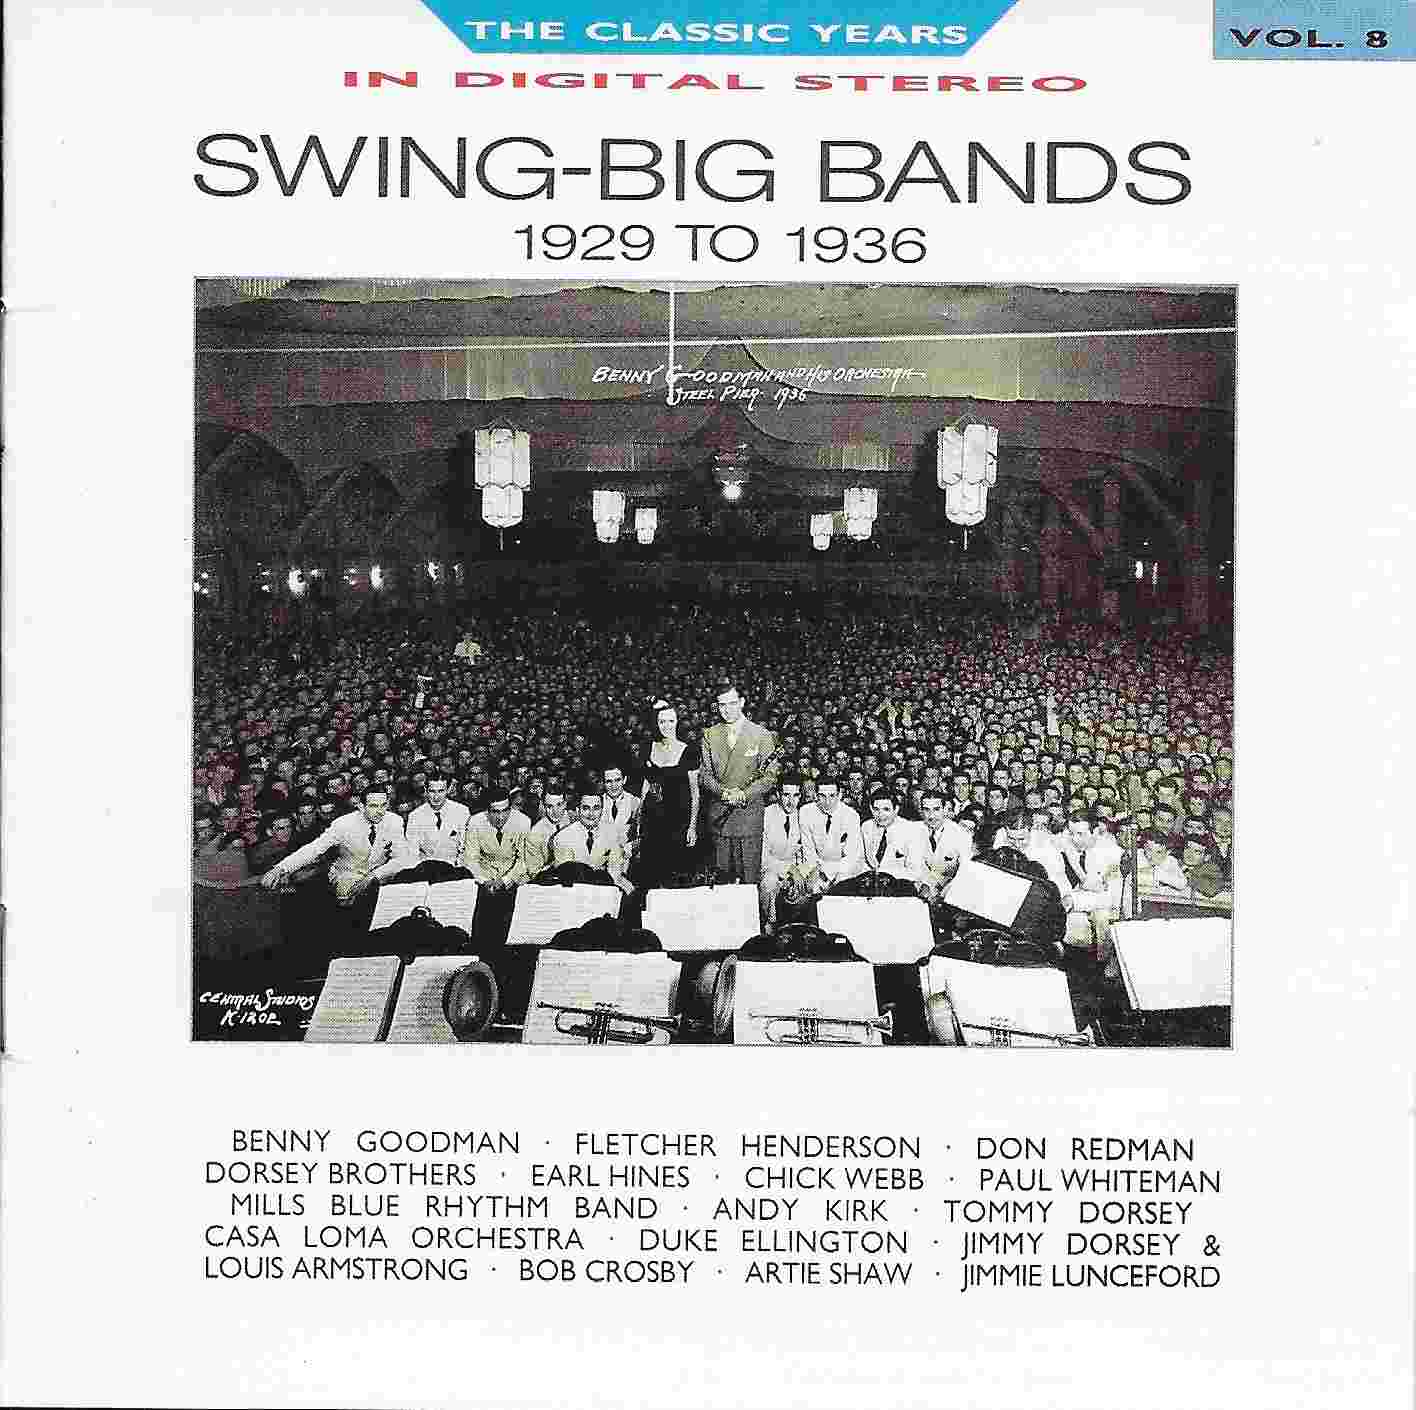 Picture of Classic years - Volume 8, Swing big bands by artist Various from the BBC cds - Records and Tapes library